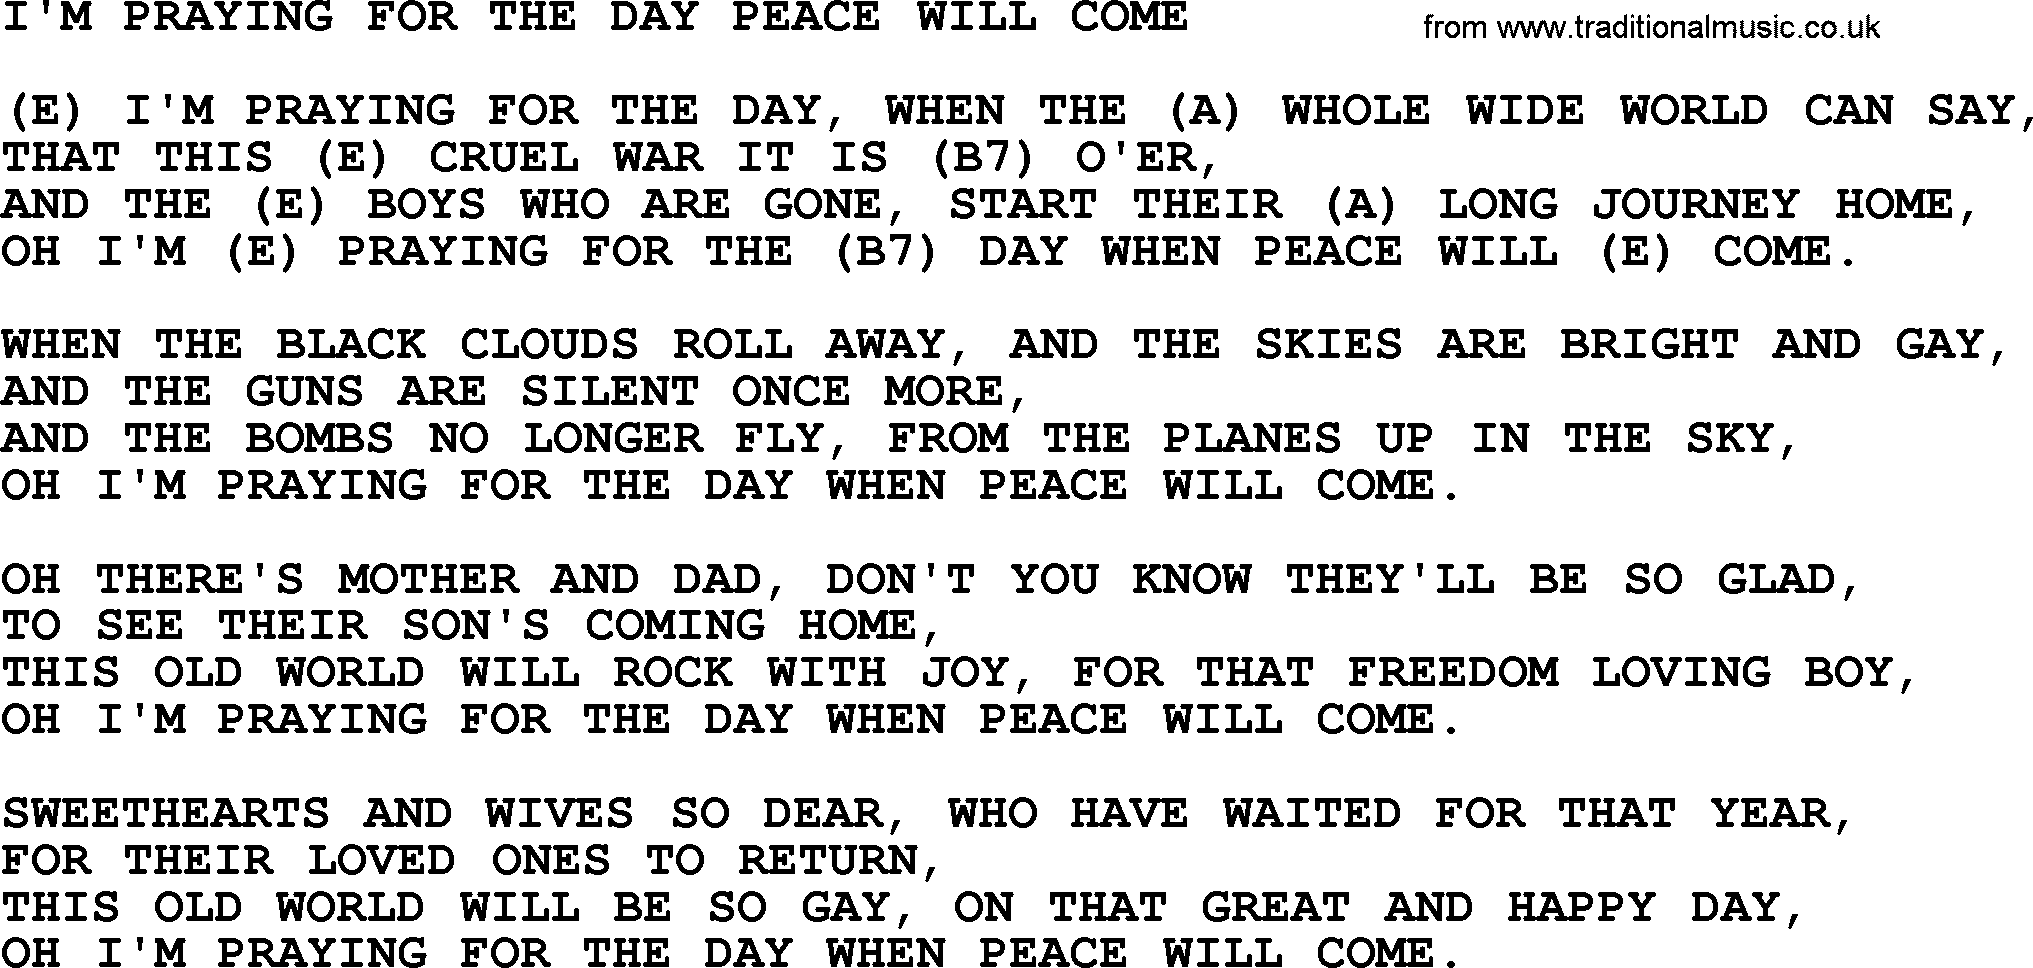 Hank Williams song I'm Praying For The Day Peace Will Come, lyrics and chords